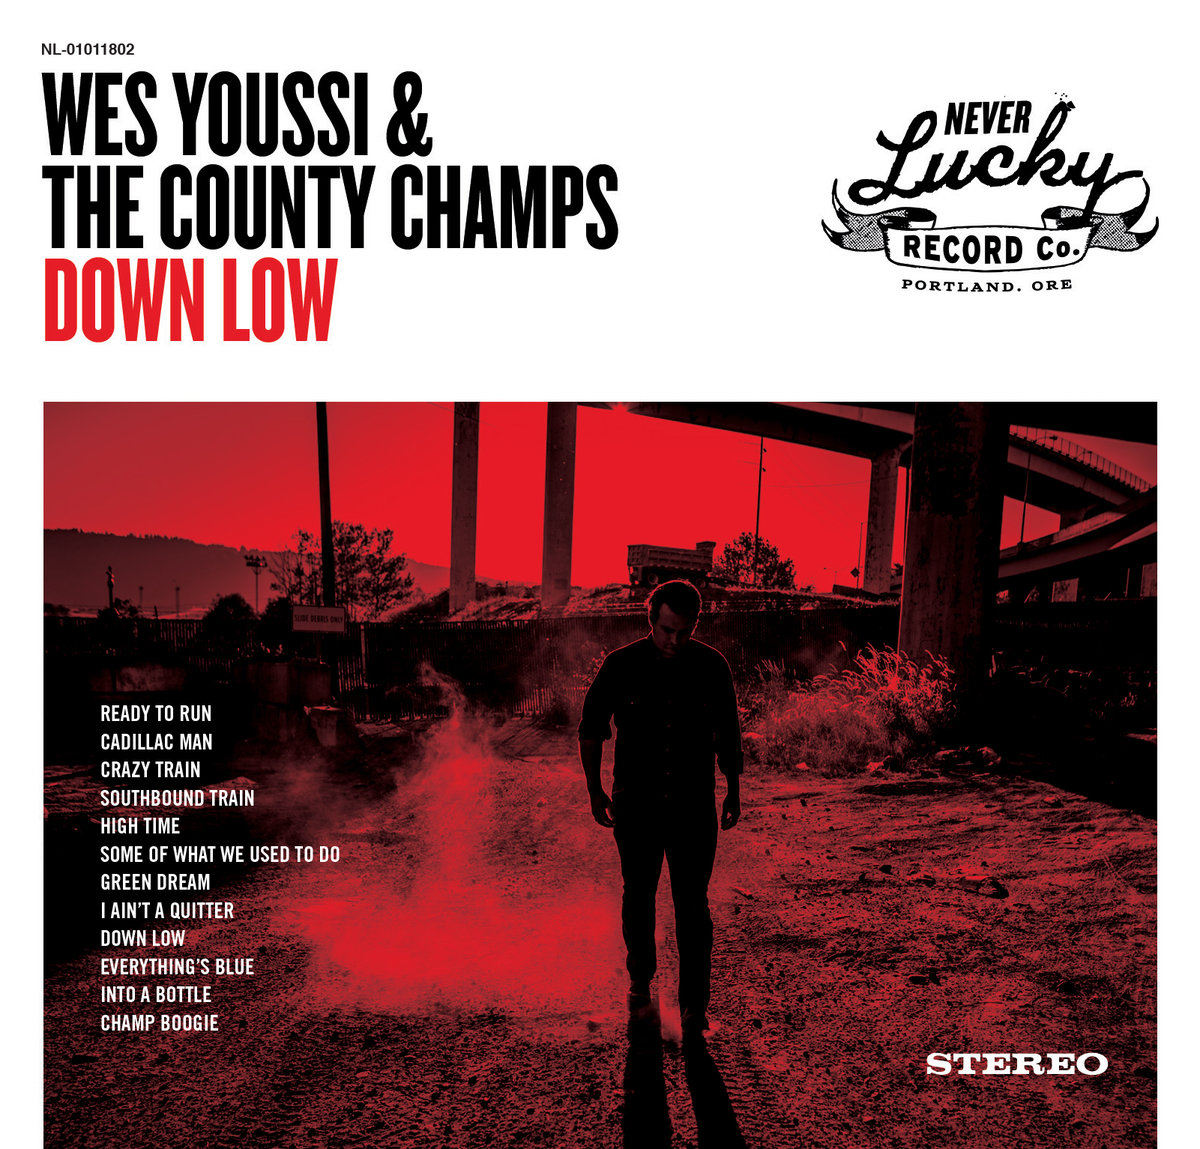 Album Review: Down Low by Wes Youssi & The County Champs